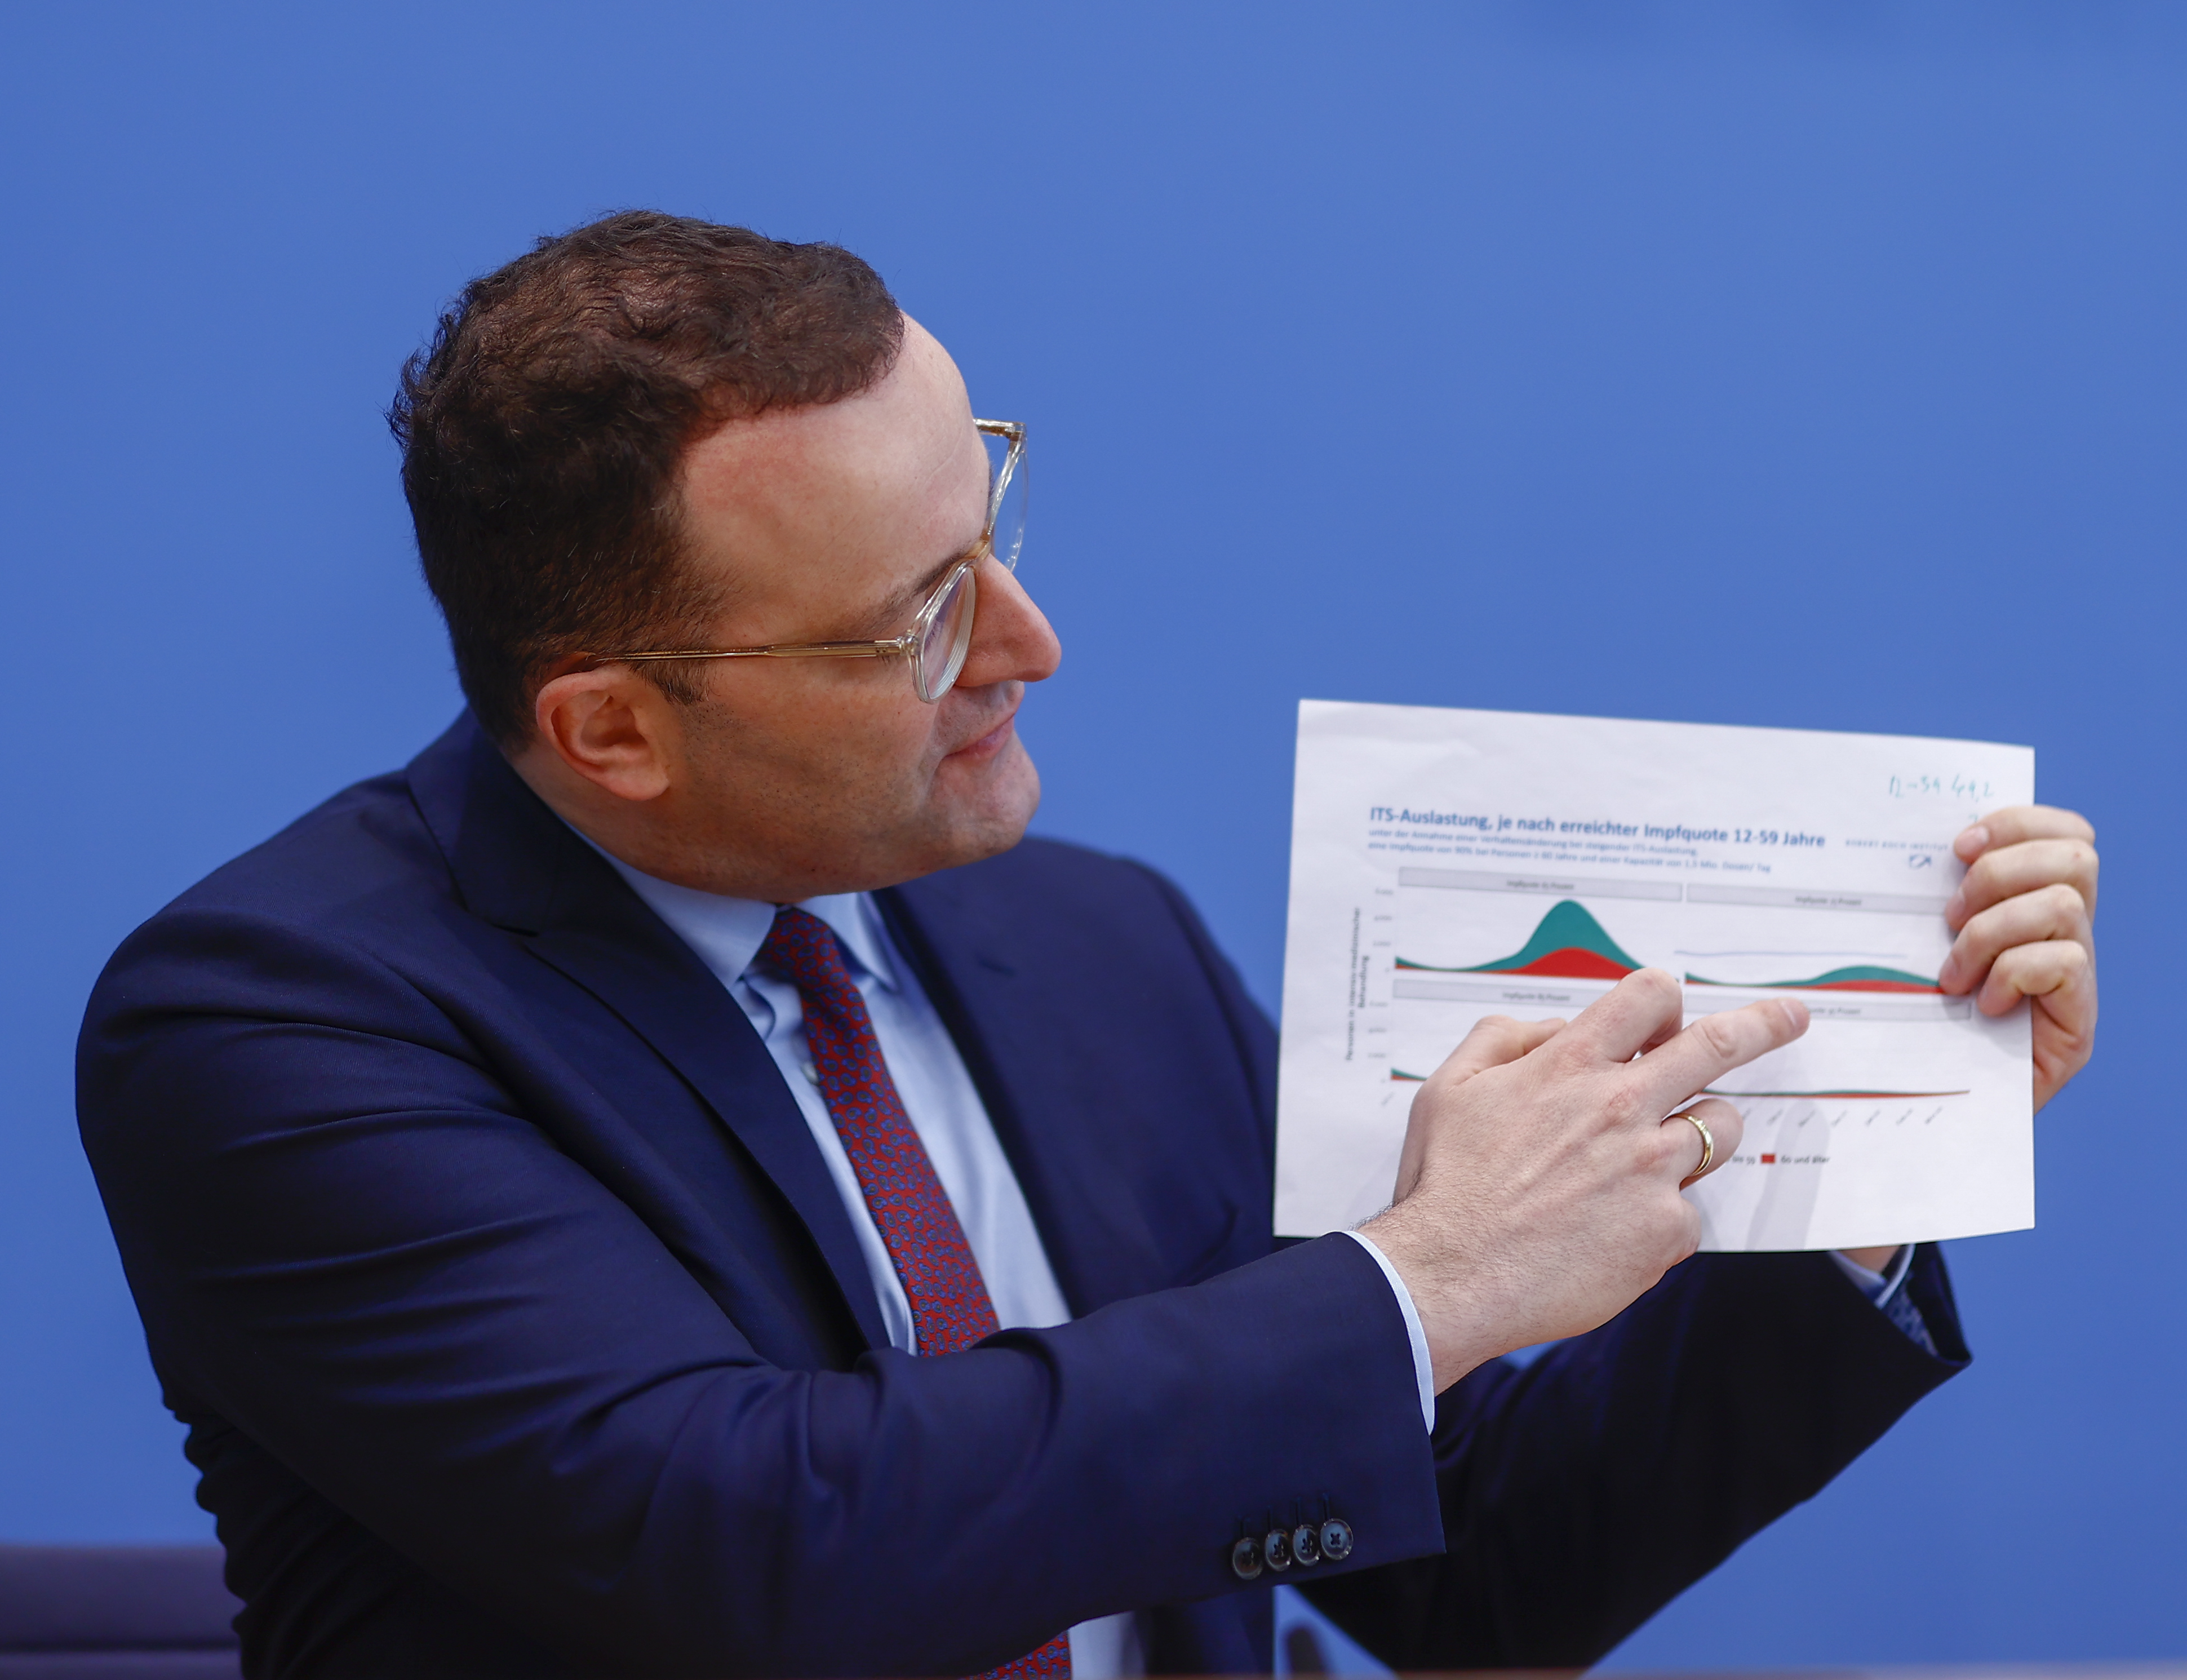 German Health Minister Jens Spahn makes a statement during a press conference about the current pandemic situation in the country in Berlin, Germany on November 26th, 2021.